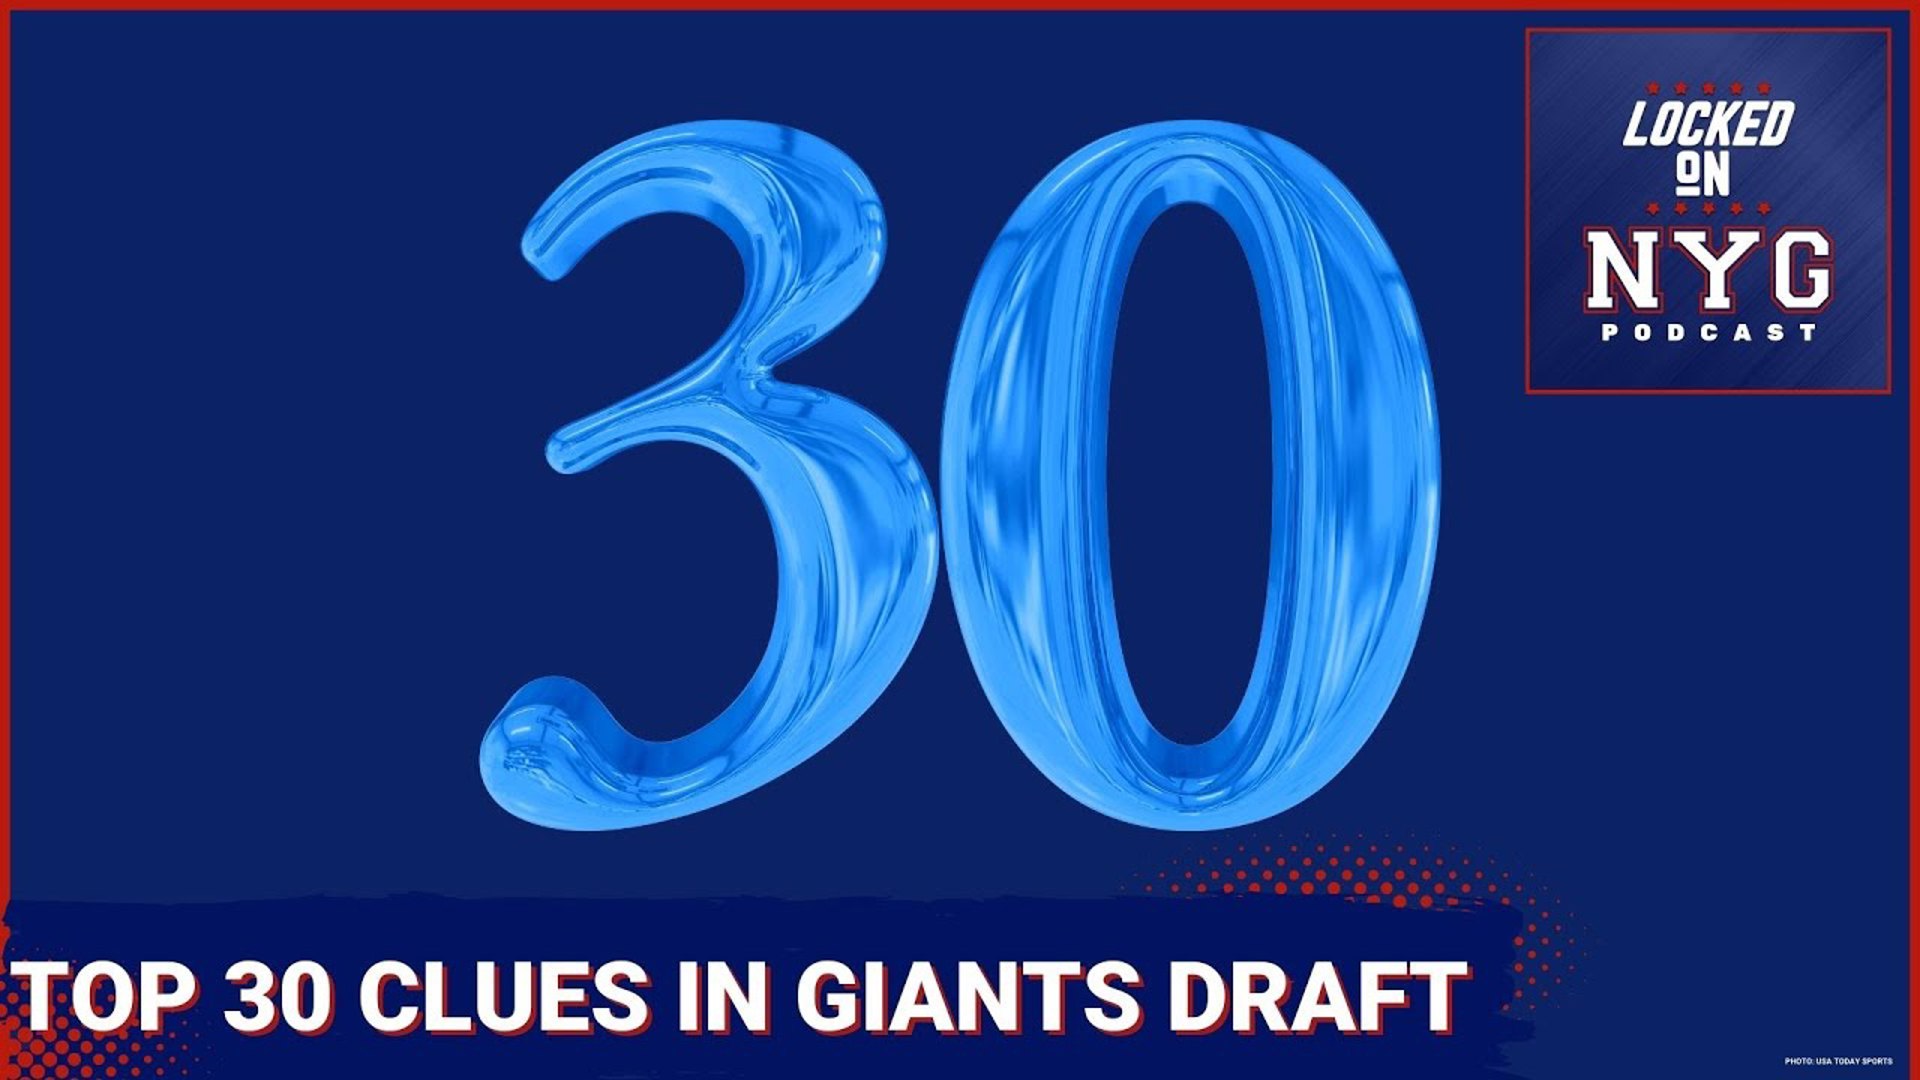 What Can We Learn from New York Giants' Top 30 Draft Visits?